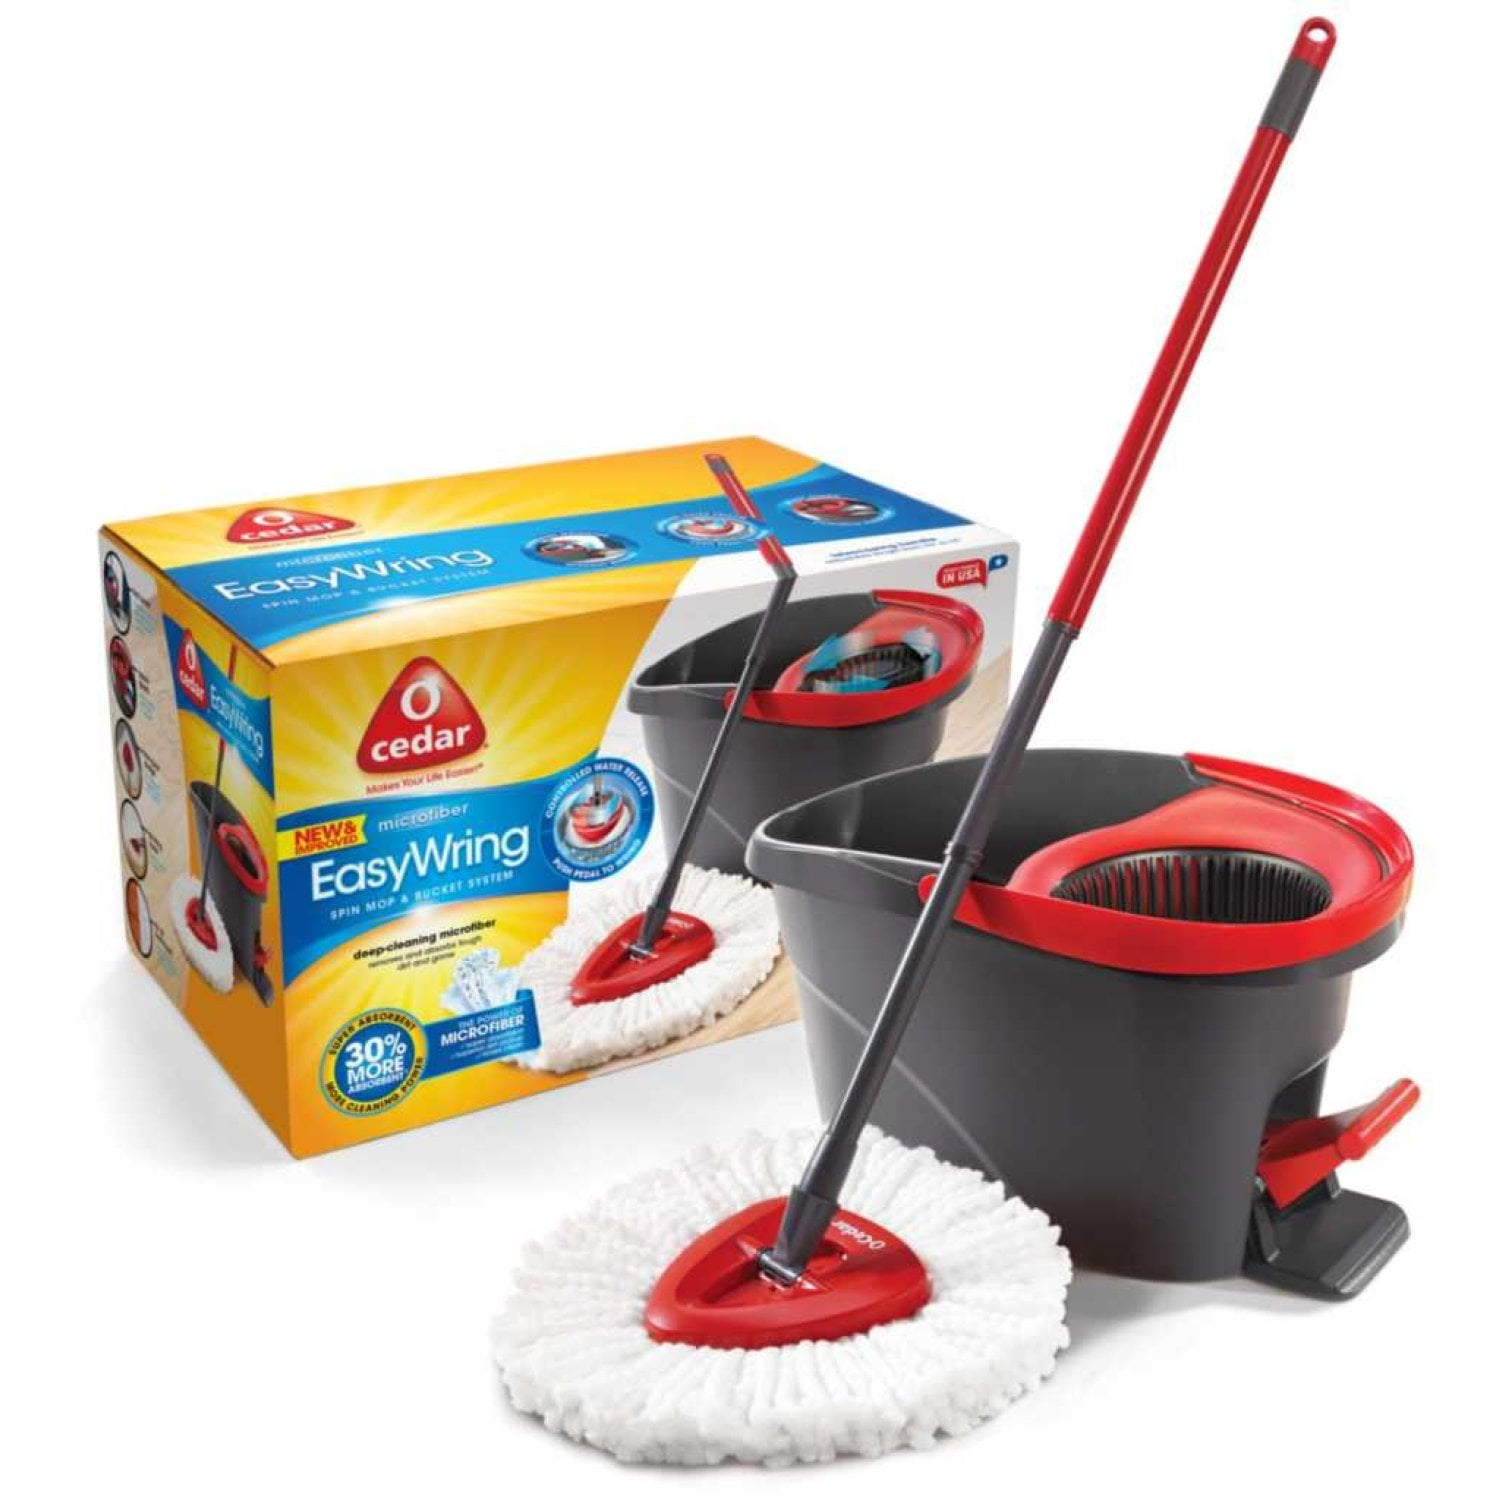 Easy Spin Bucket, Mop Wring Vileda and of - Professional Spin Easy and Bucket - Wring - 148473 Mop 1 Case